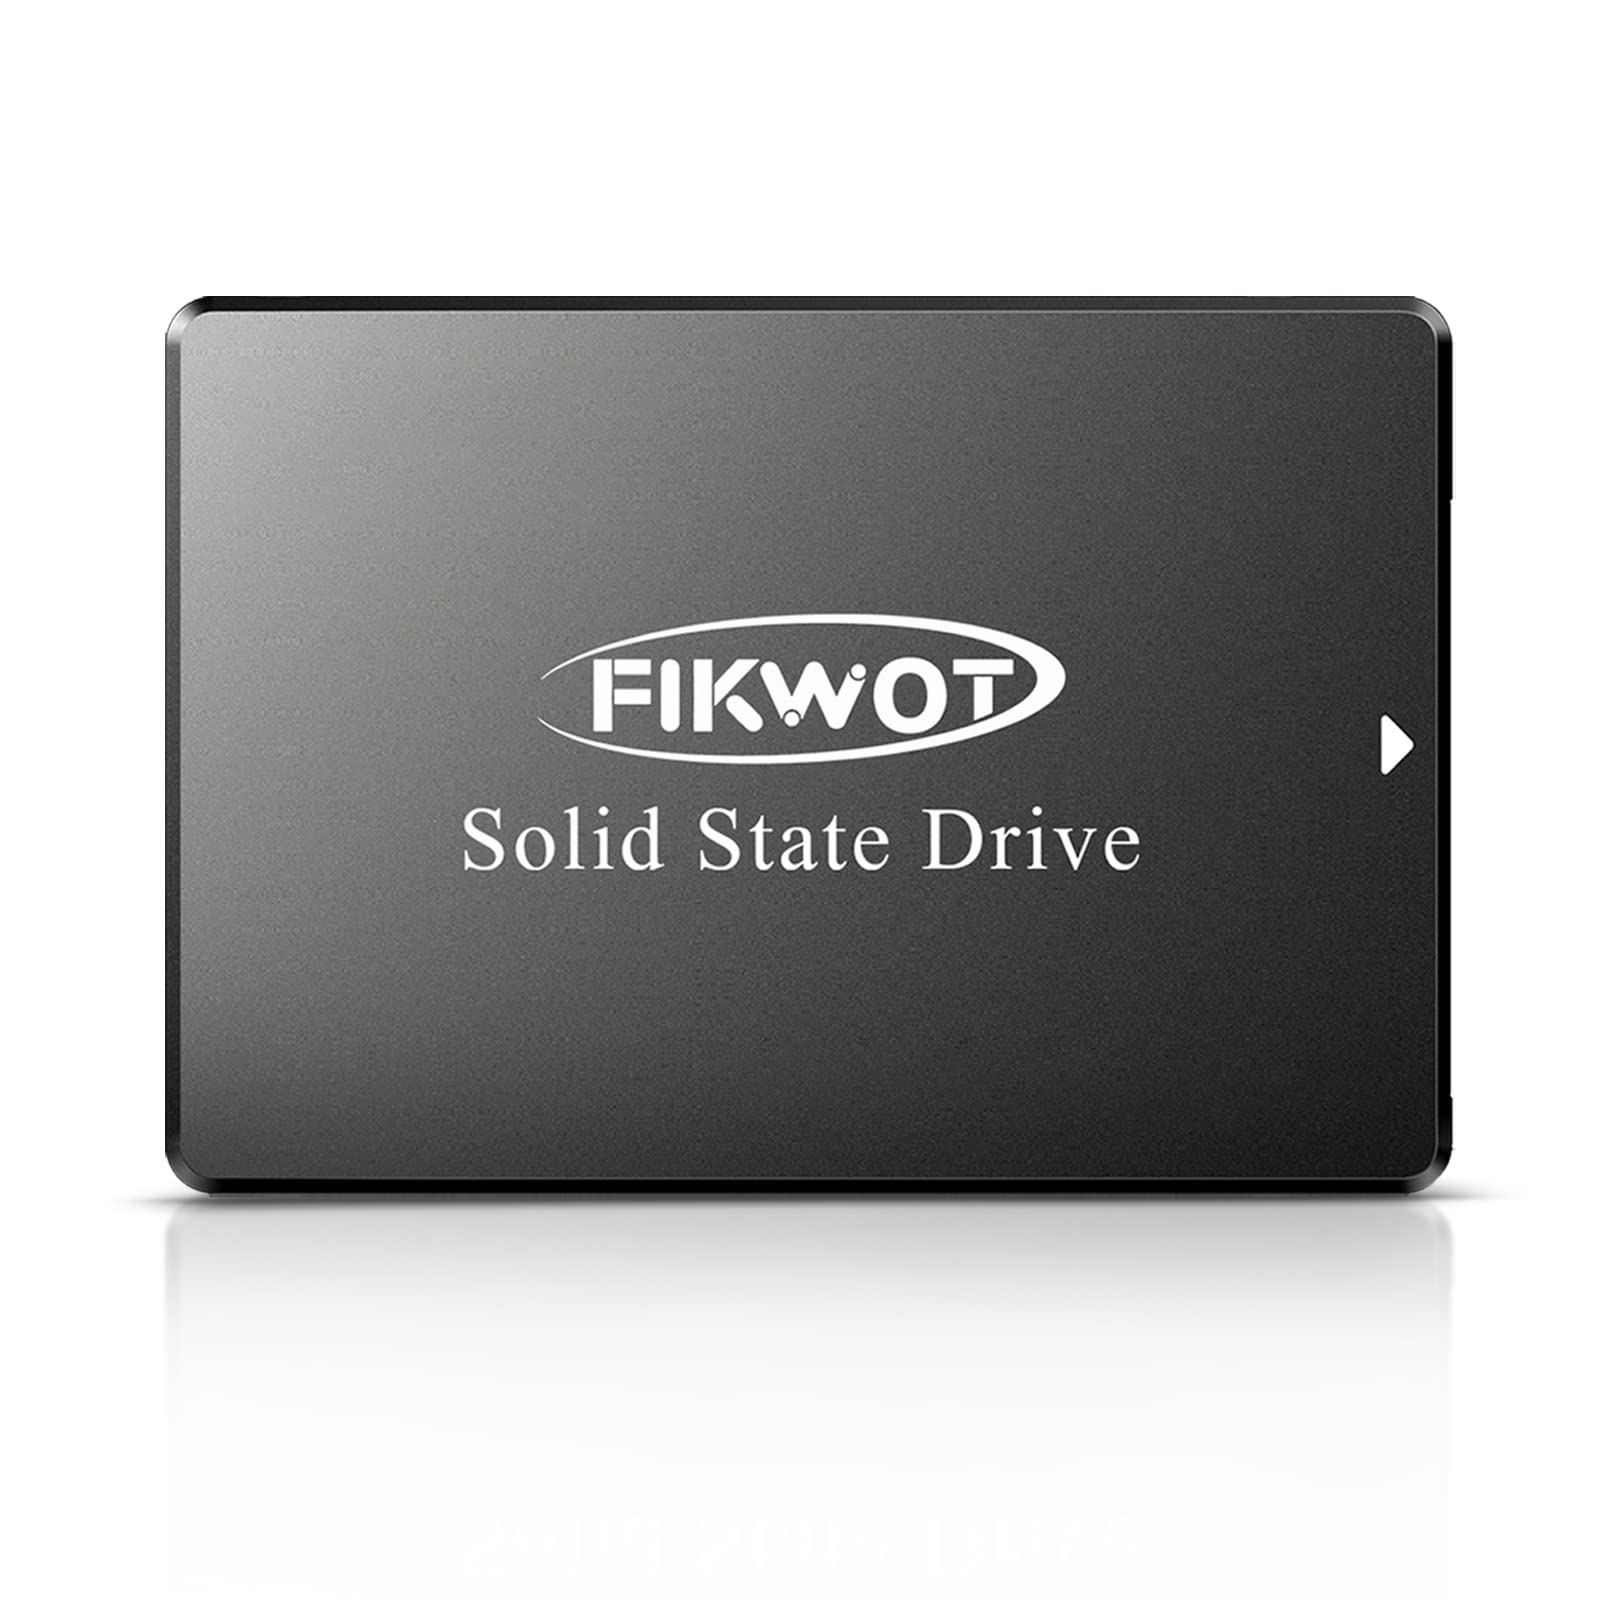 Fikwot FS810 1TB SSD SATA III 2.5" 6GB/s, Internal Solid State Drive 3D NAND Flash (Read/Write Speed up to 550/450 MB/s) Compatible with Laptop & PC Desktop